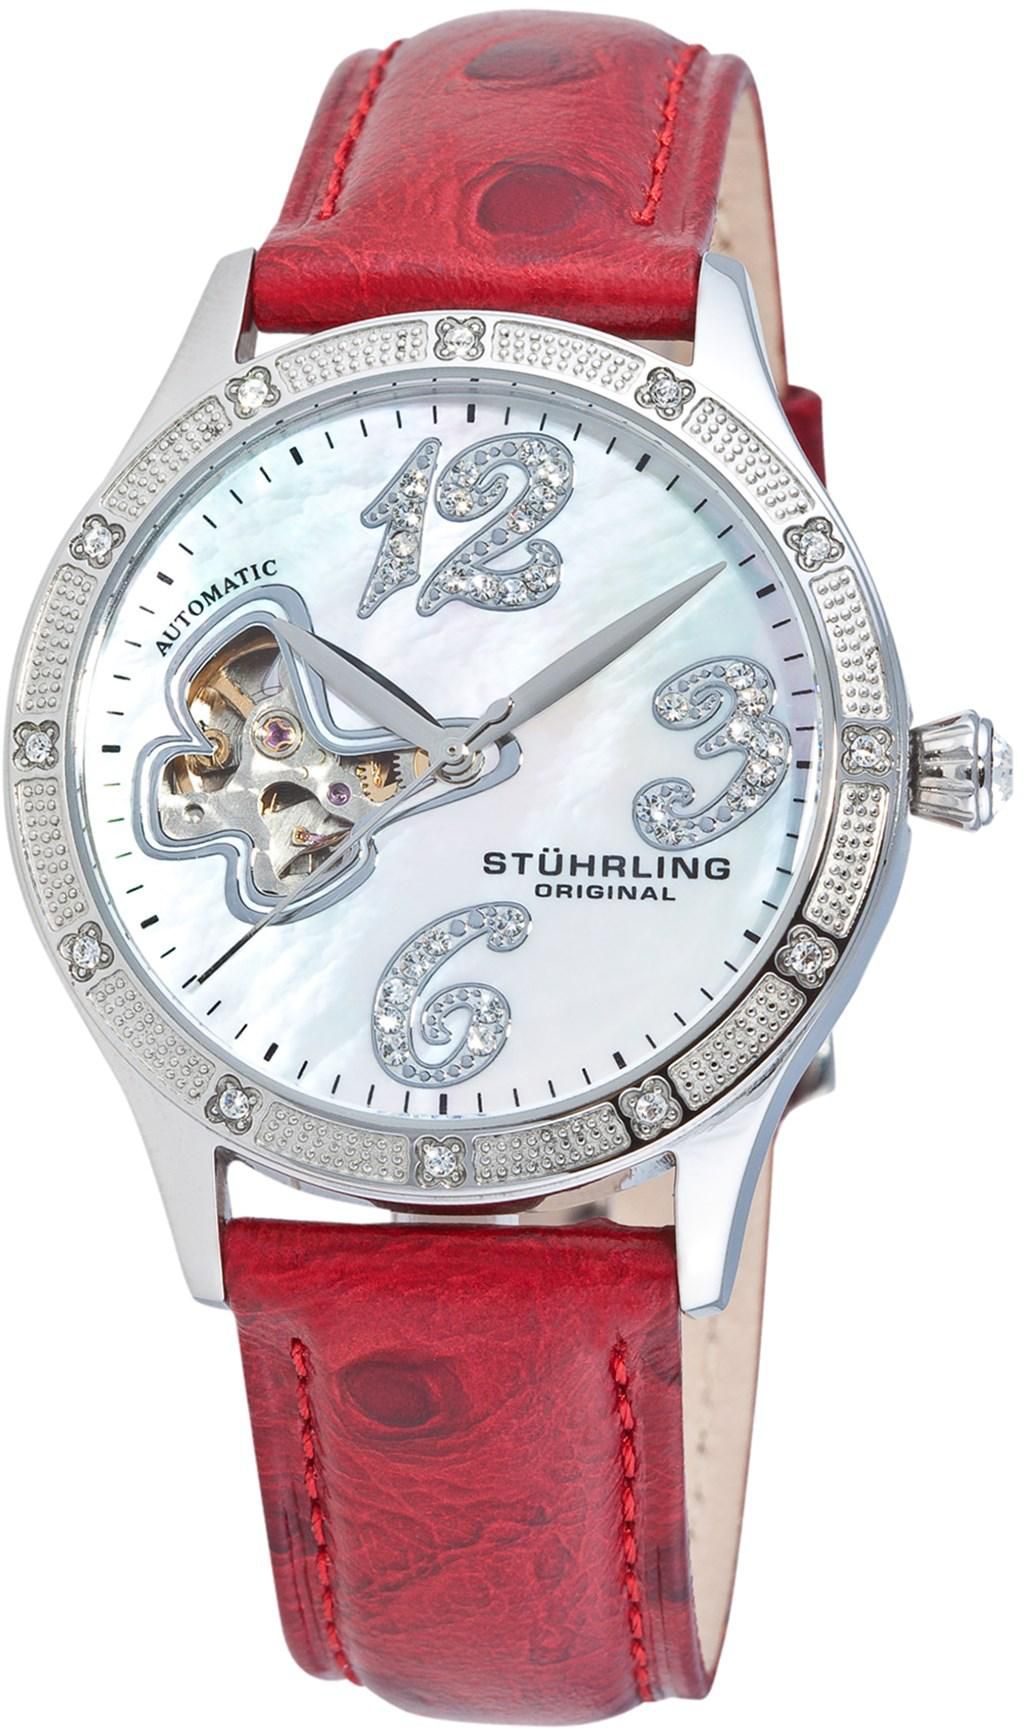 Stuhrling Original Women's Mother of Pearl Dial Casual Watch Leather Strap - 196SW.1115H7